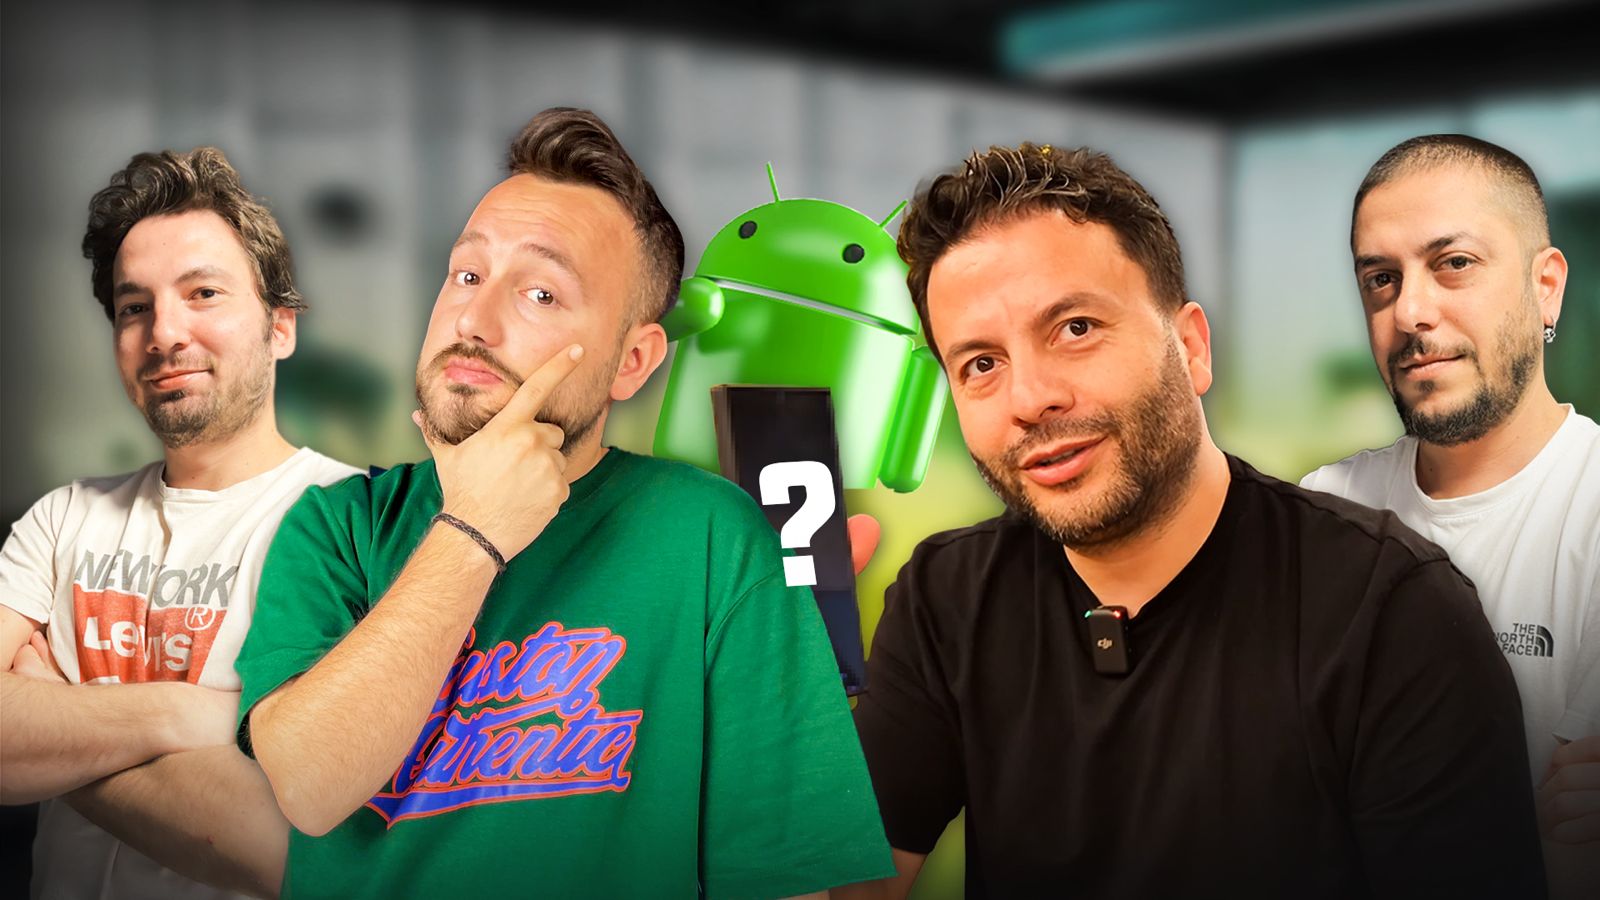 Who uses which Android phone in the office?